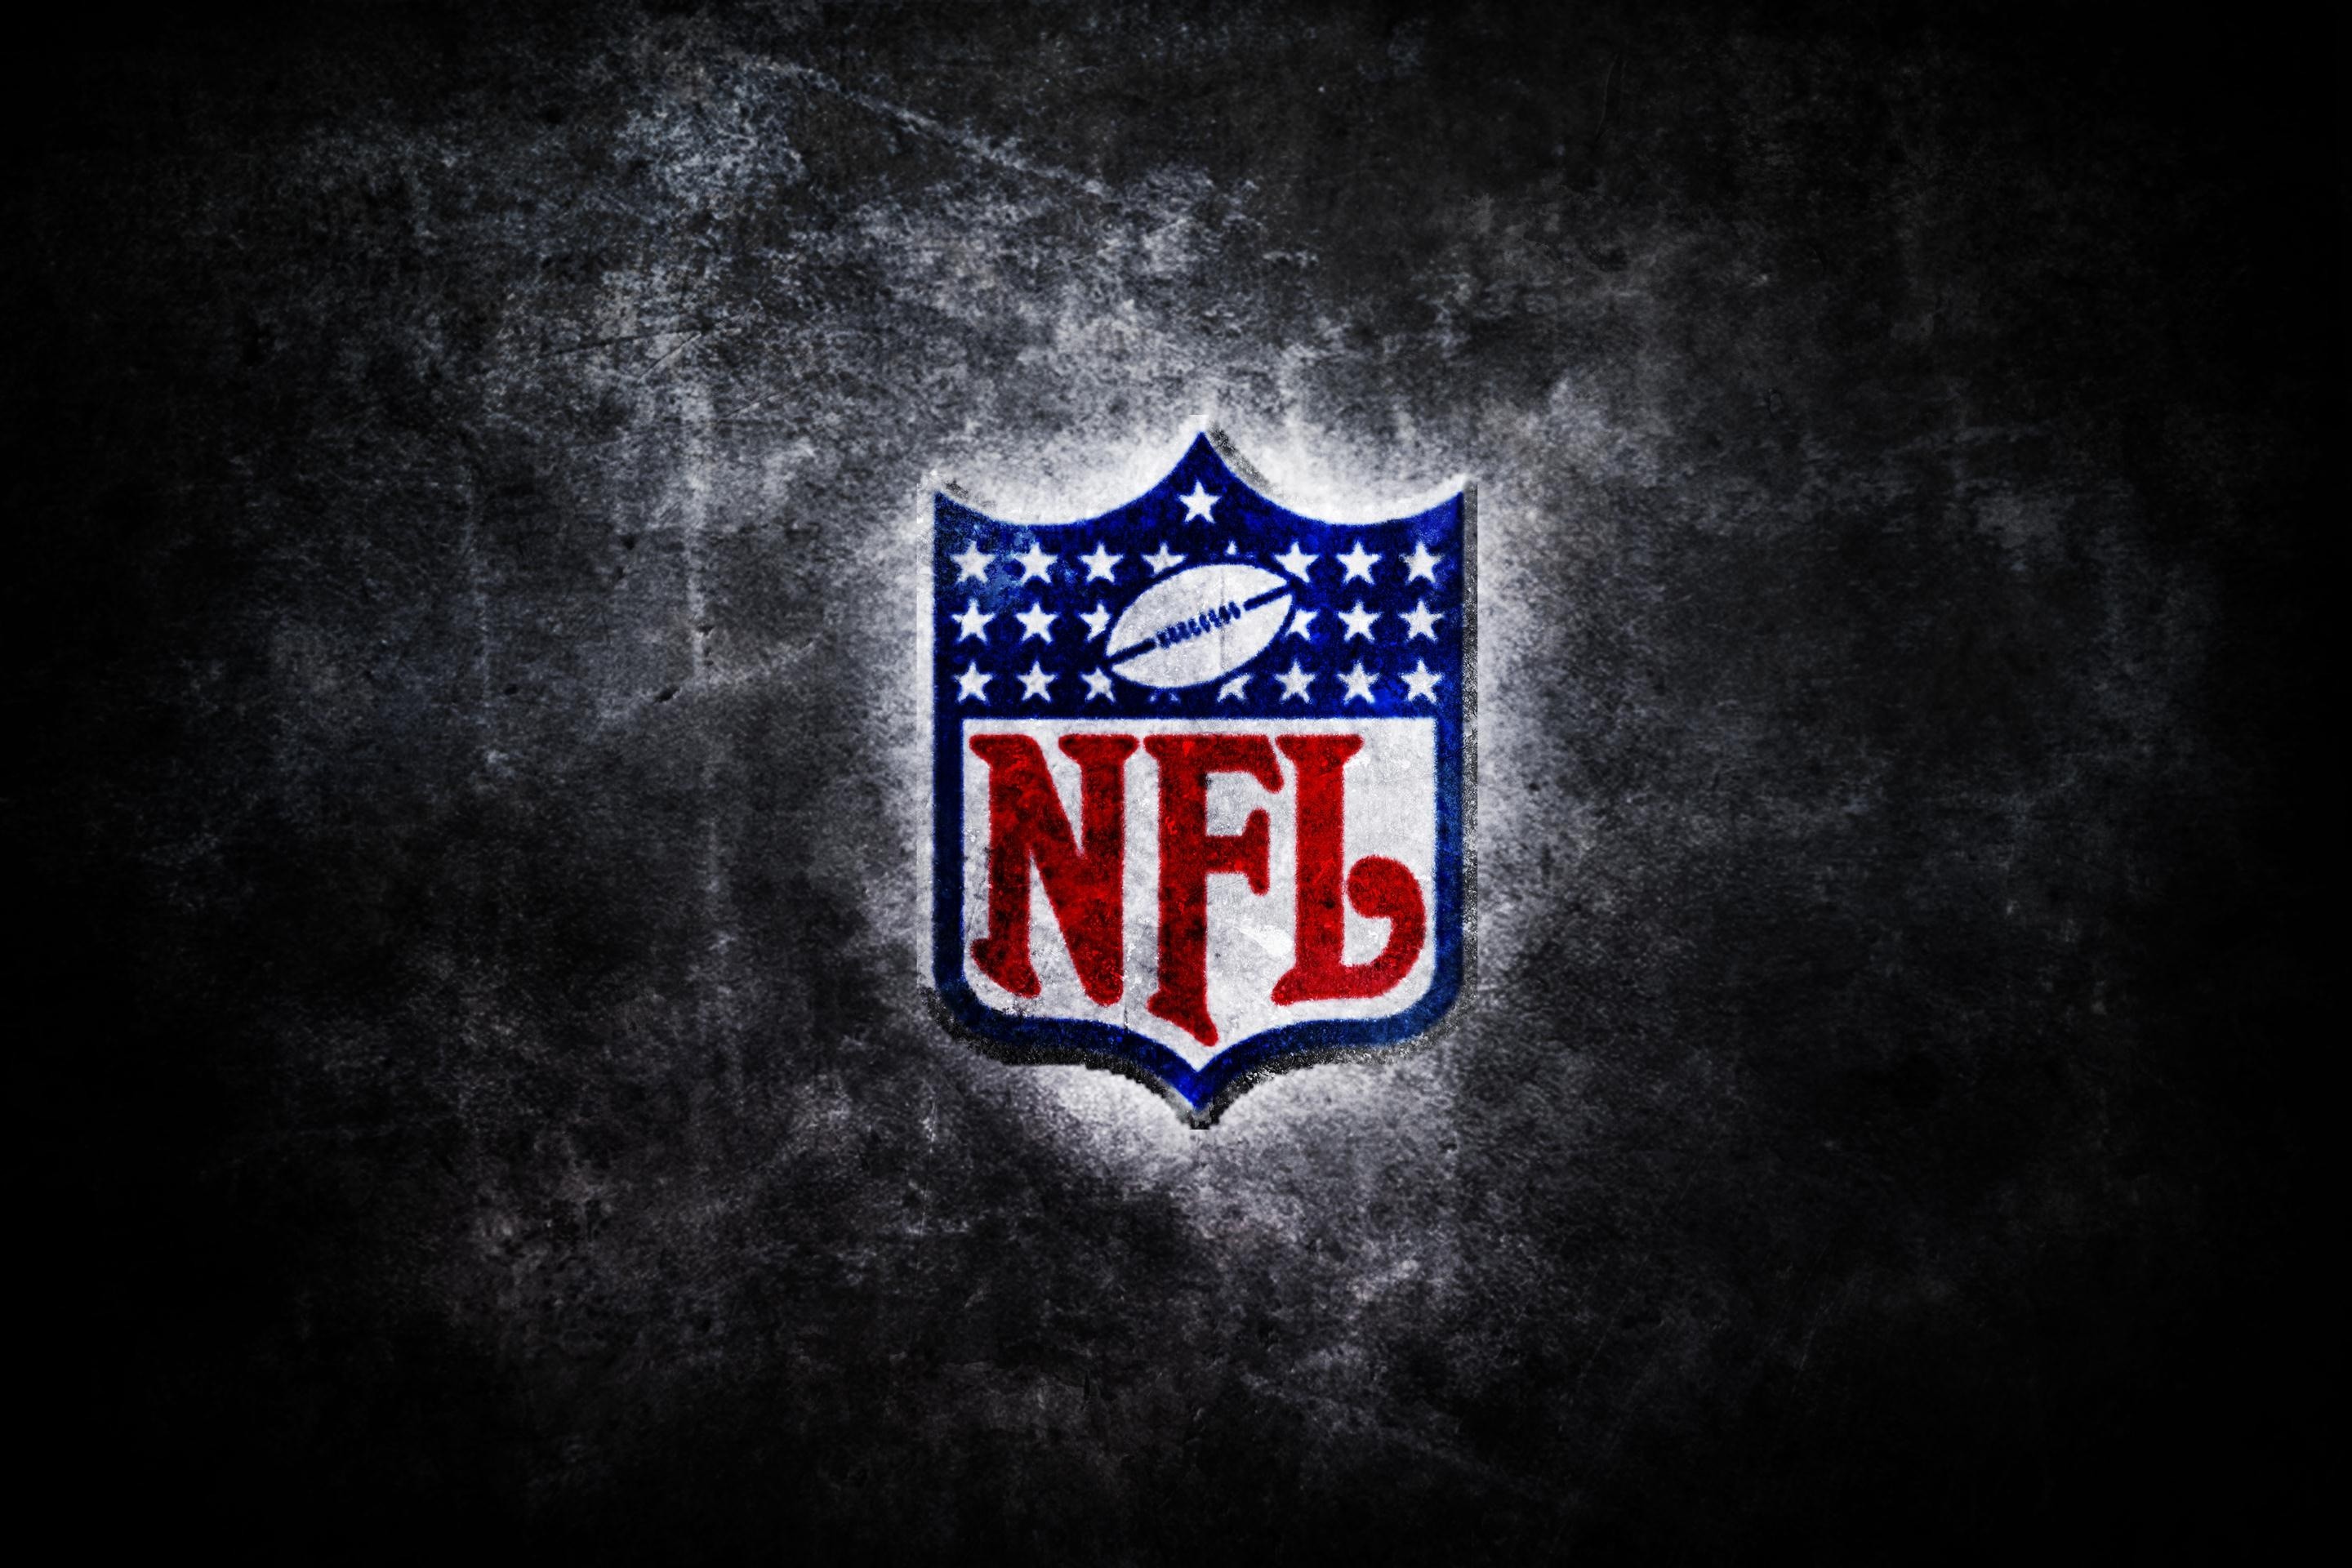 2880x1920 ... Tons of Awesome Football Wallpaper Nfl Desktop Backgrounds To Download  For Free Free Hd Wallpaper Images